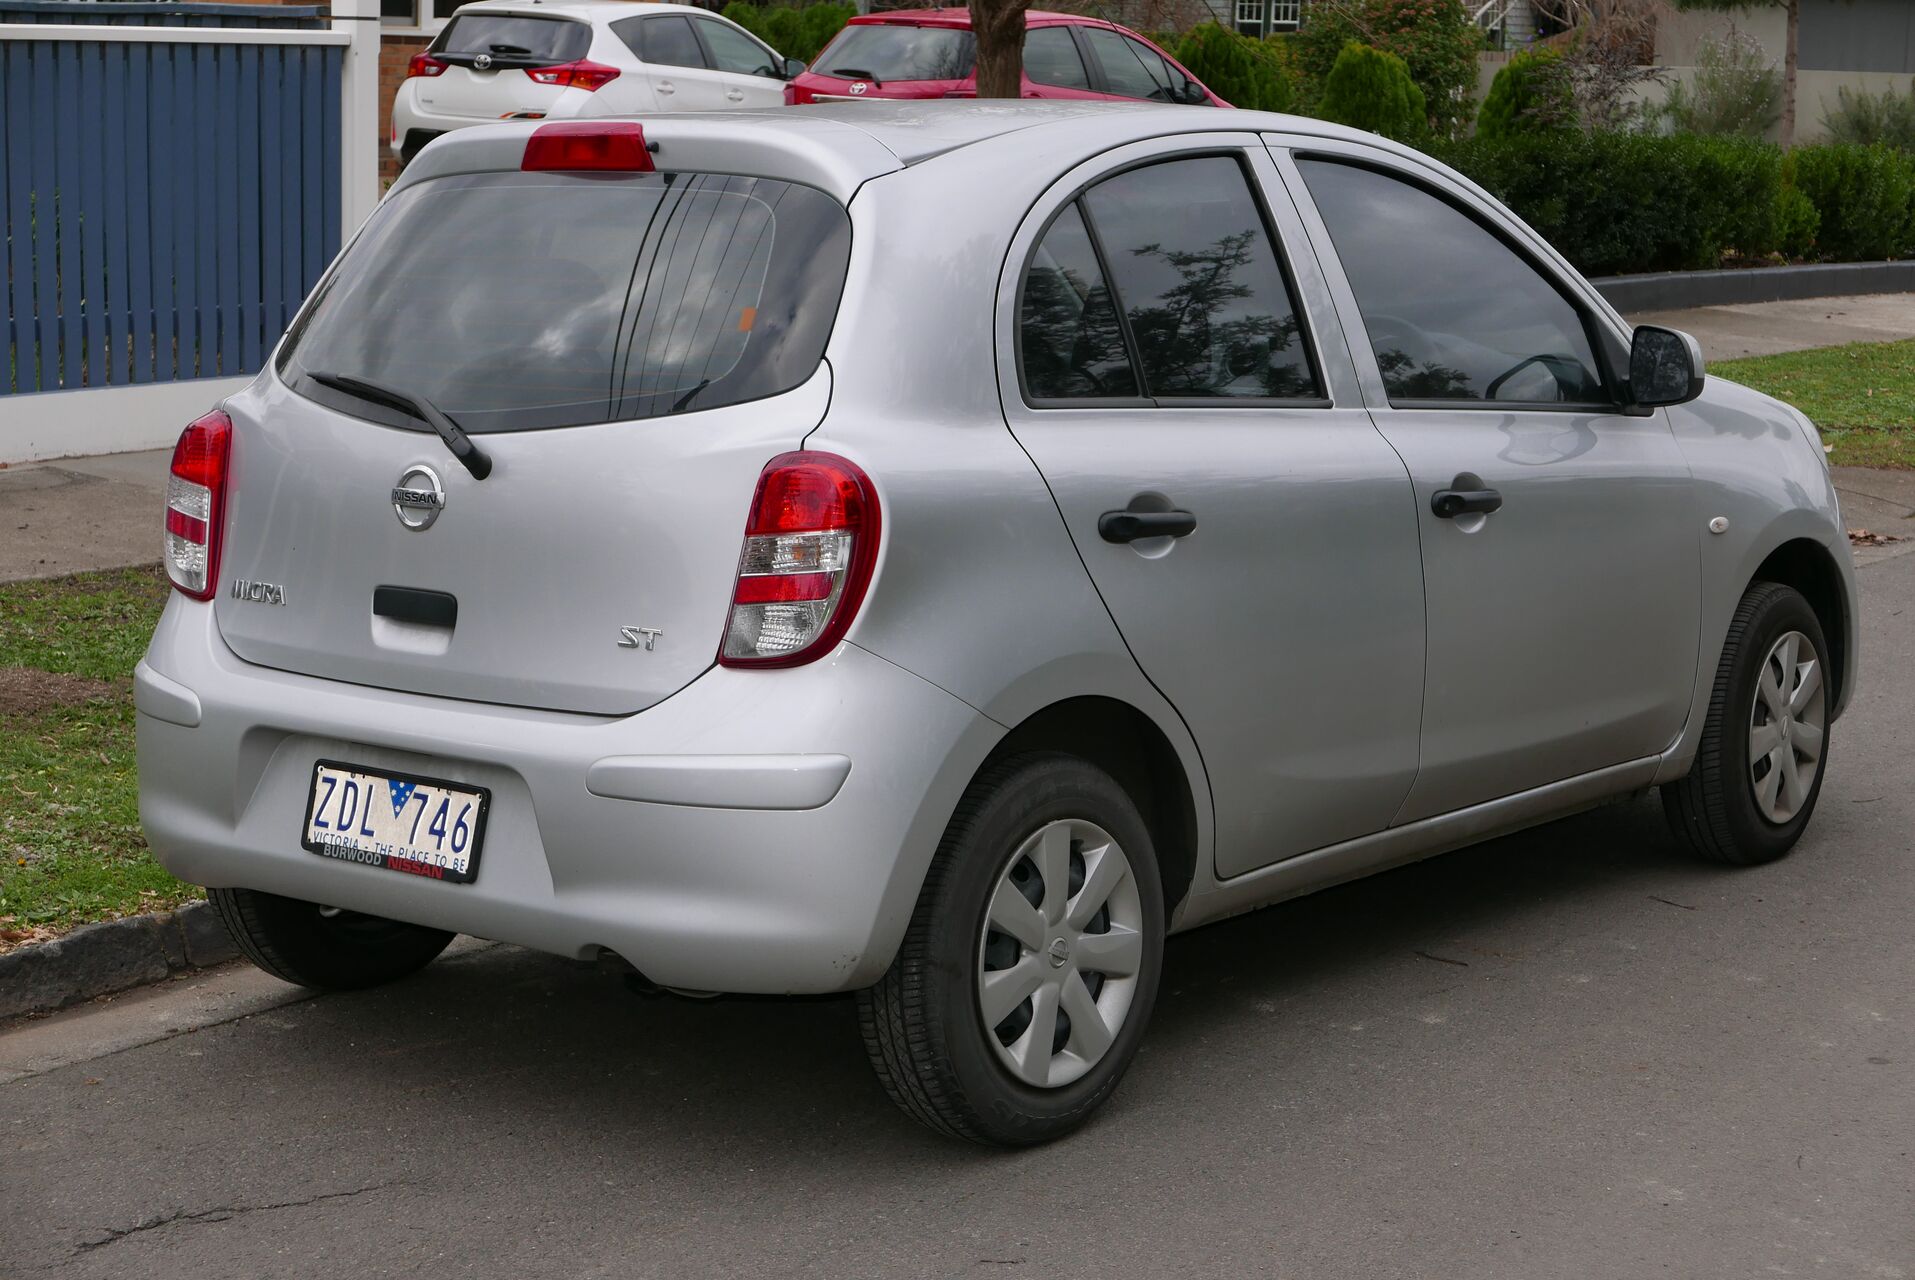 Nissan Micra (K13) 1.2 (80 Hp) 2010 - 2013 Specs and Technical